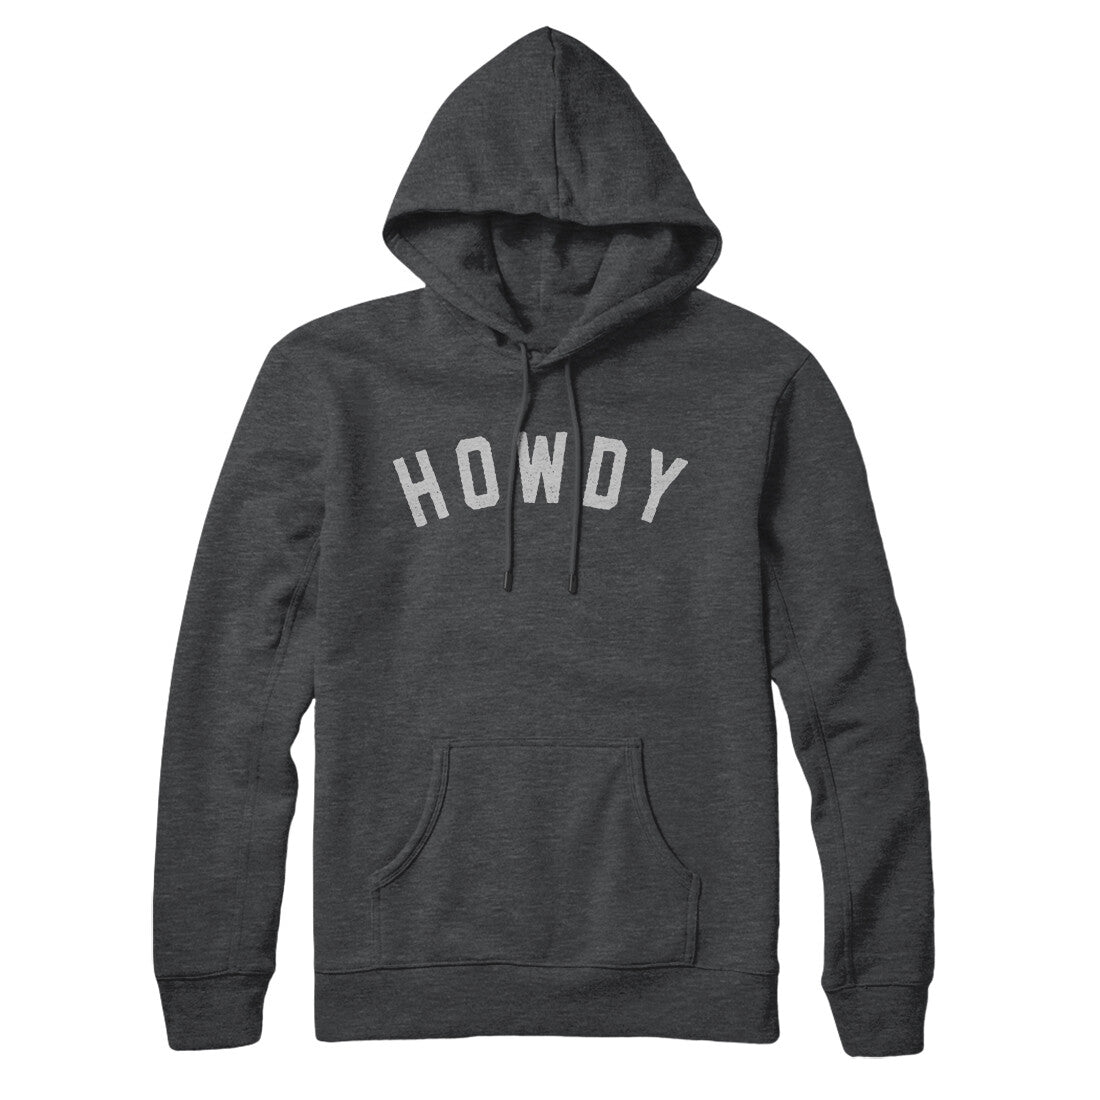 Howdy in Charcoal Heather Color